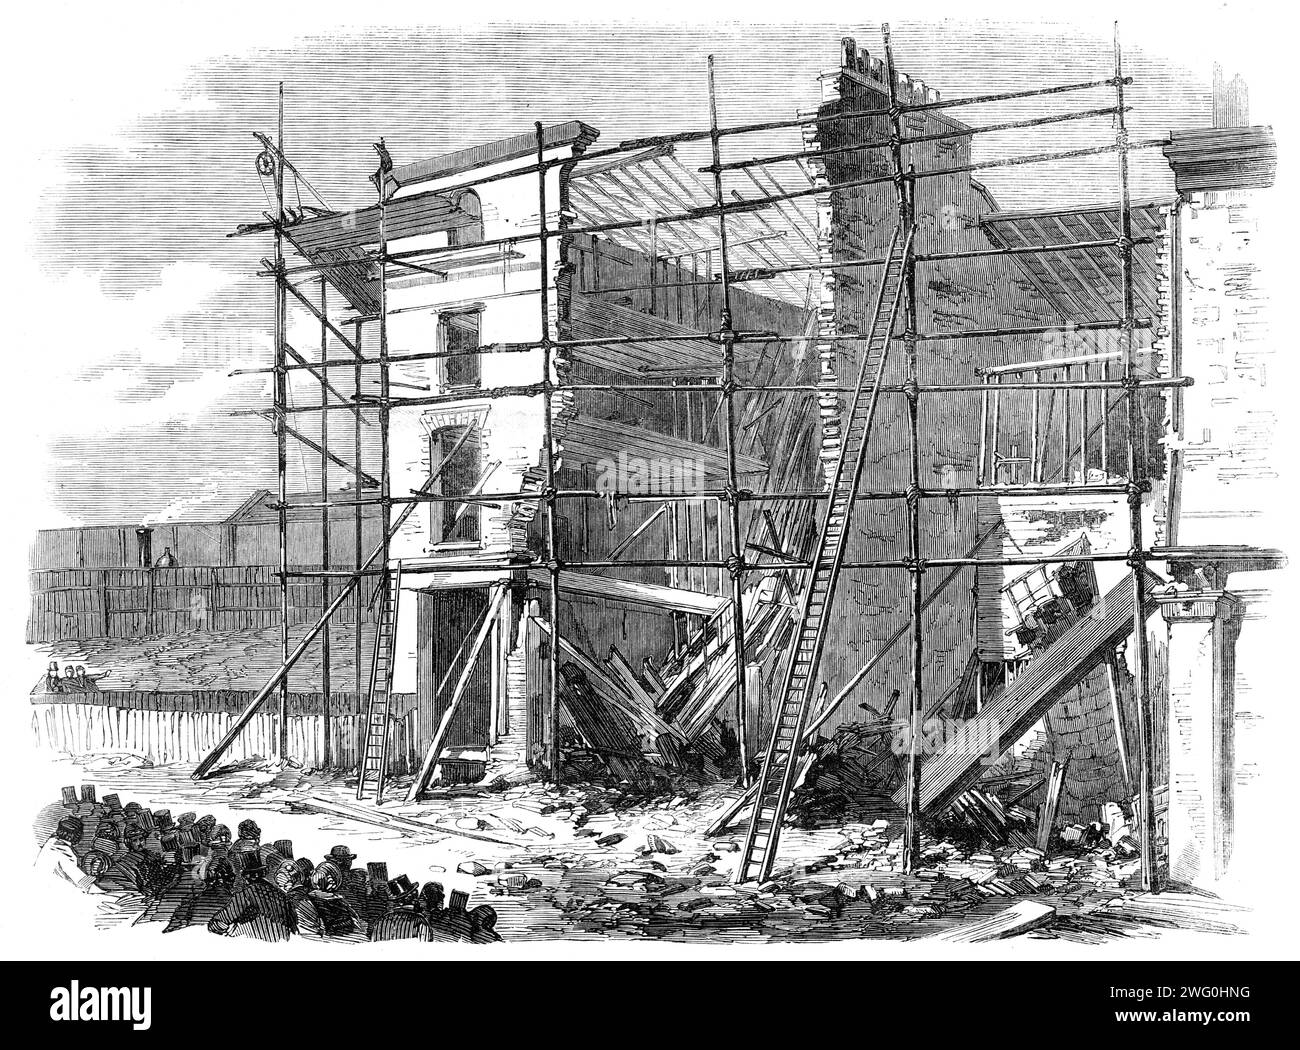 Fall of three houses in Amherst-road, Hackney, [London], 1862. 'On the morning of Wednesday week, between the hours of ten and eleven o'clock, the inhabitants of Hackney were thrown into great excitement in consequence of the fall of three new houses, attended with loss of life and serious injury to several persons. In the Amherst-road, close to the viaduct of the North London Railway, where it crosses the Hackney-road, are a number of new buildings, three-stories high, built by Mr. Amos, which were being finished in the interior by carpenters, plasterers, and other artisans, at the above hour Stock Photo